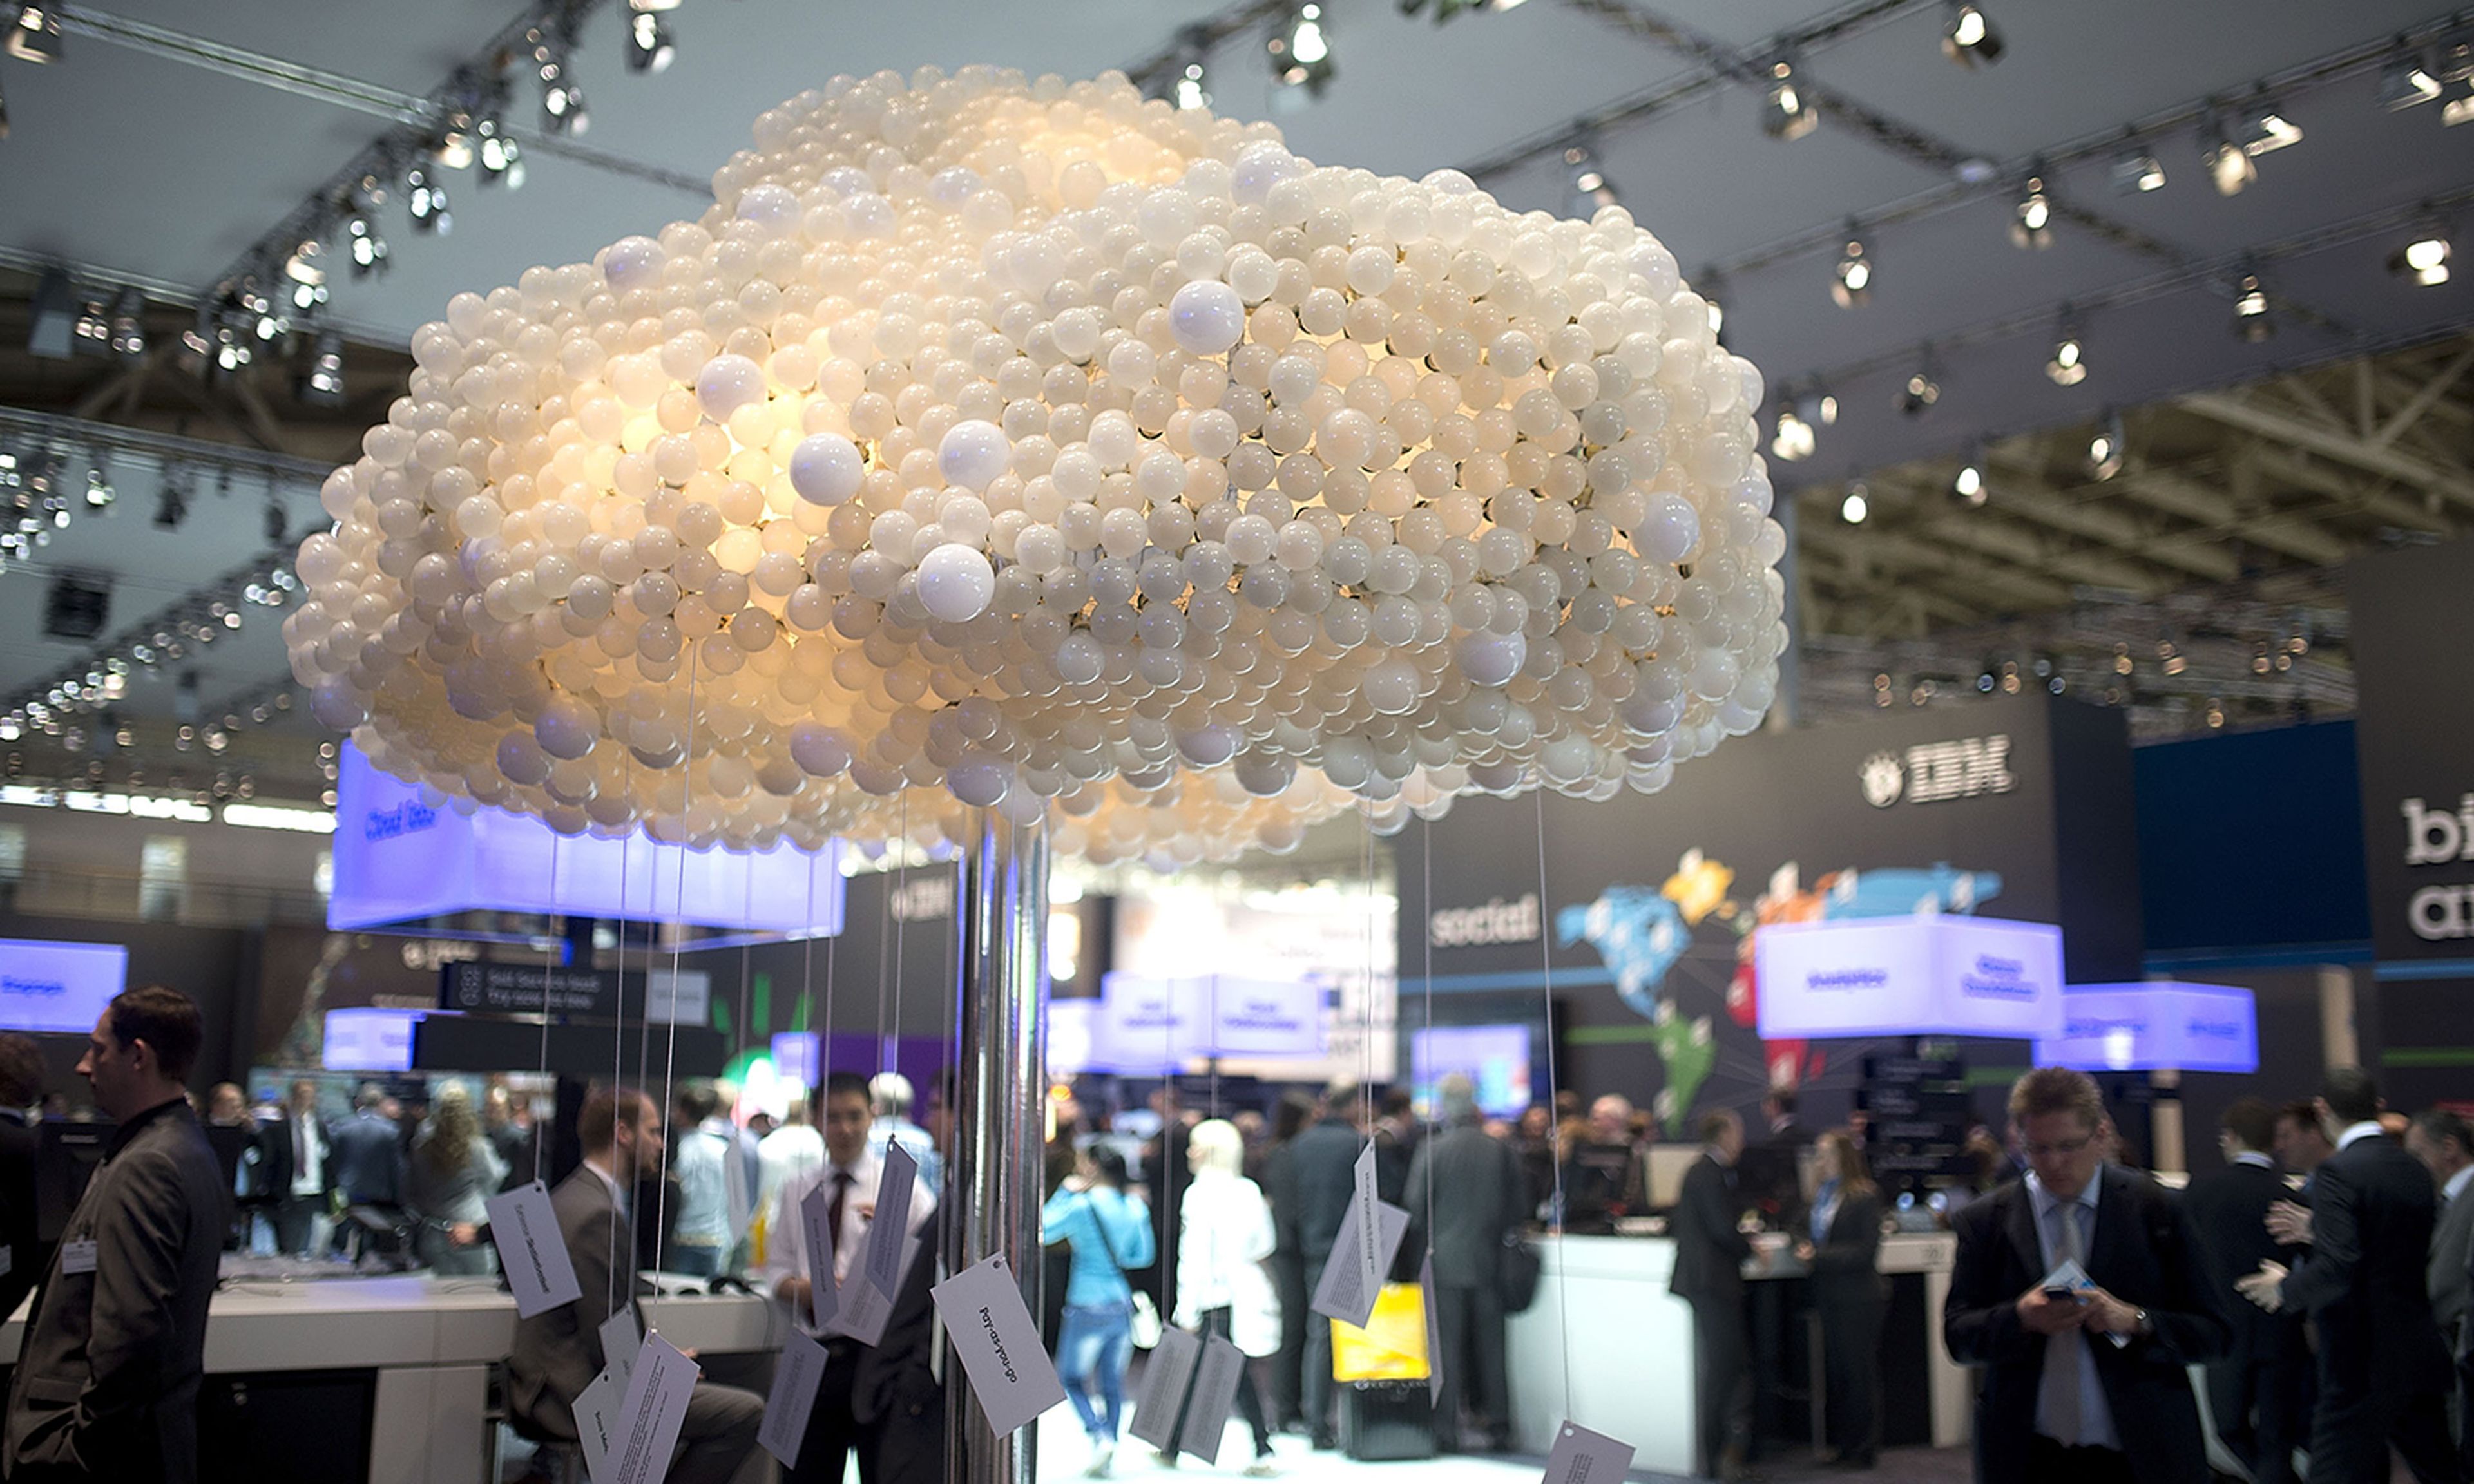 A symbolic data cloud is seen at the 2014 CeBIT technology Trade fair on March 10, 2014, in Hanover, Germany. (Photo by Nigel Treblin/Getty Images)